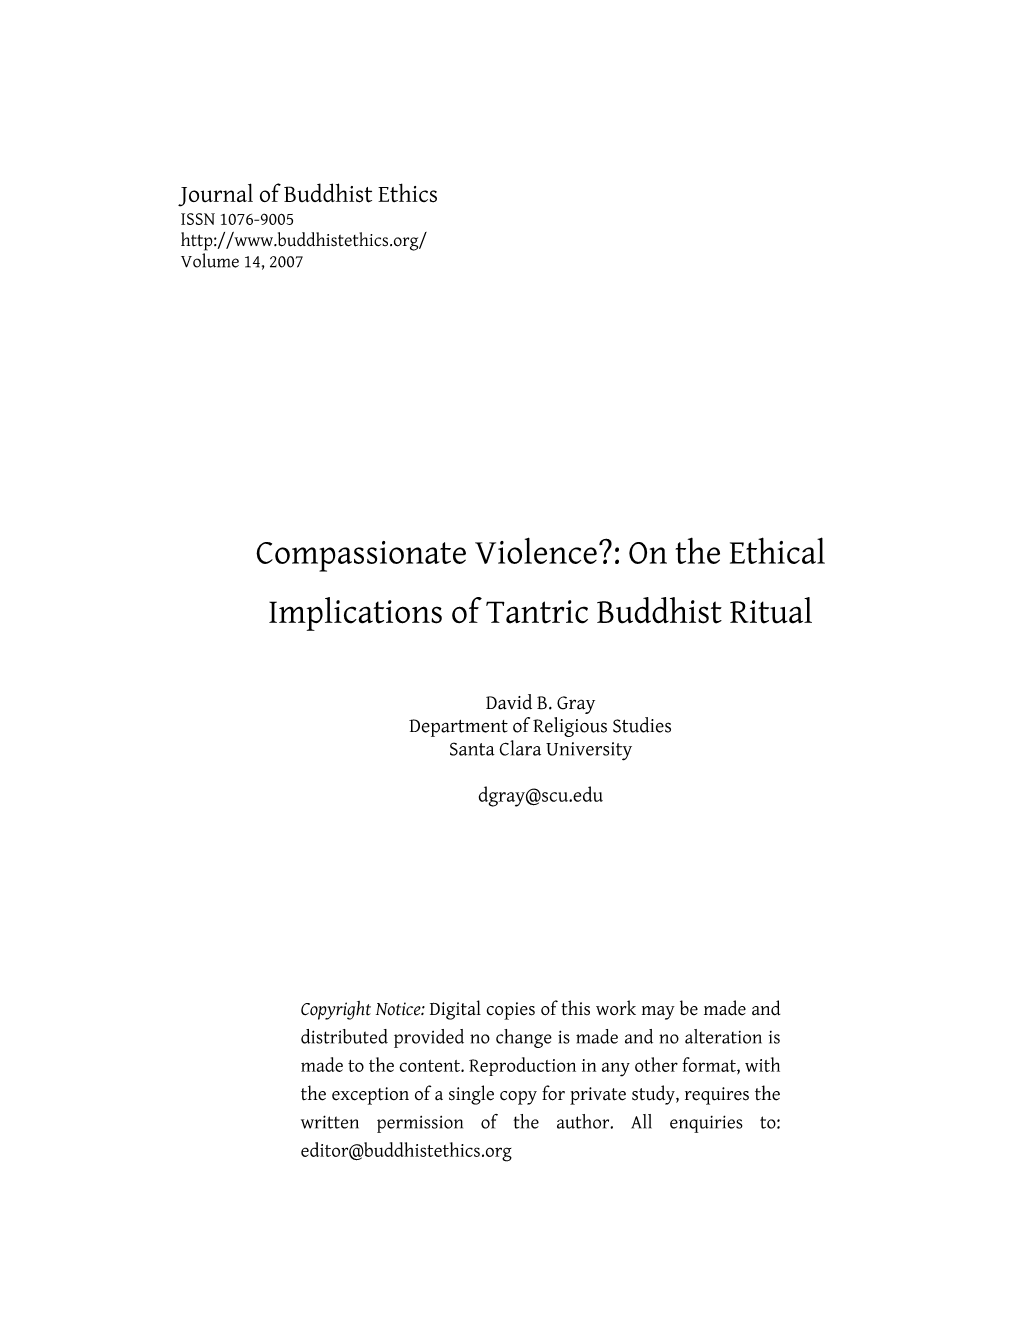 Compassionate Violence?: on the Ethical Implications of Tantric Buddhist Ritual